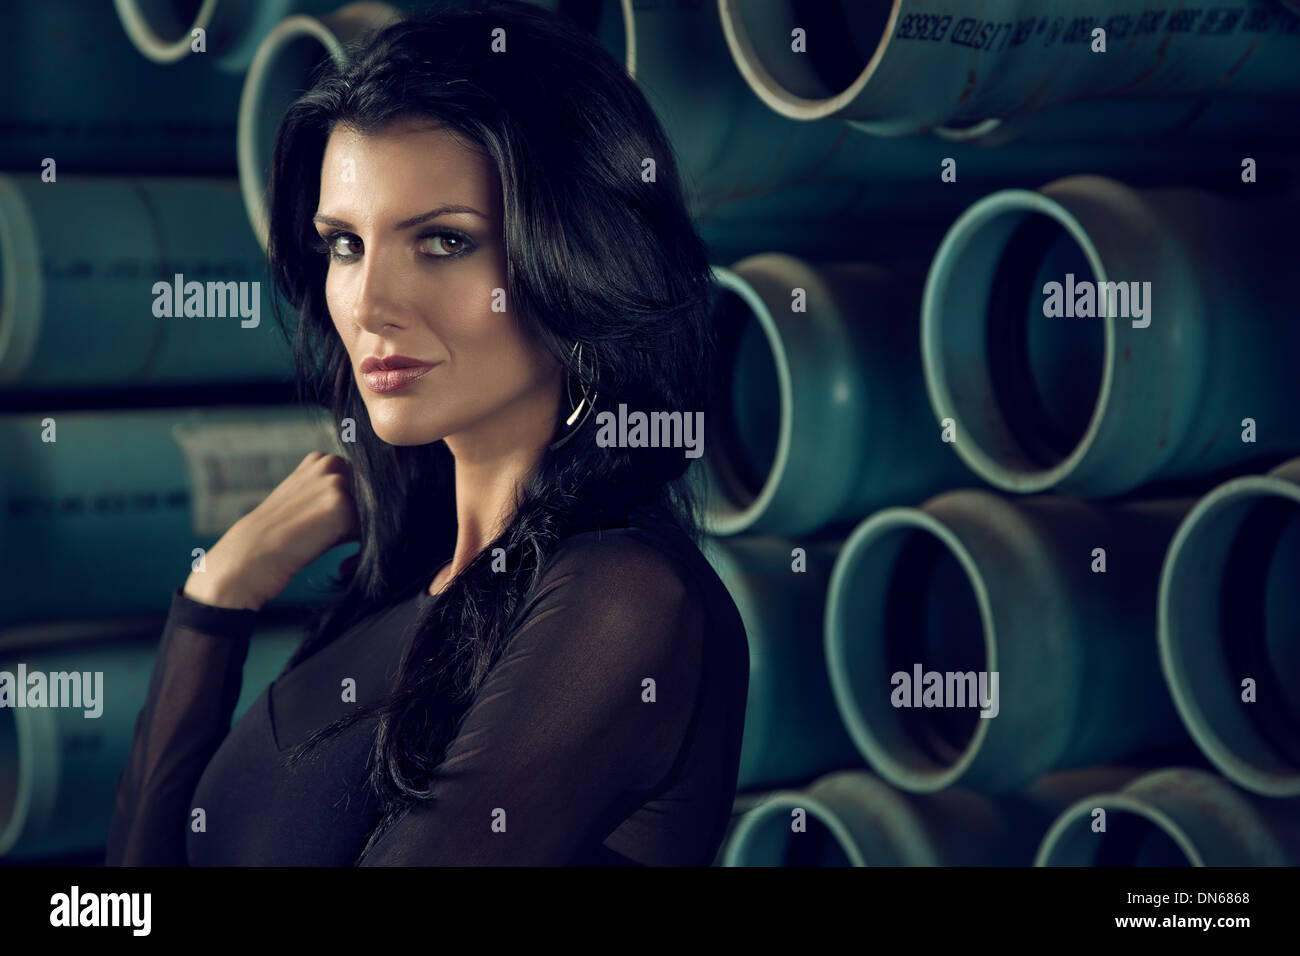 Fashion portrait of woman standing in front of pipes Stock Photo